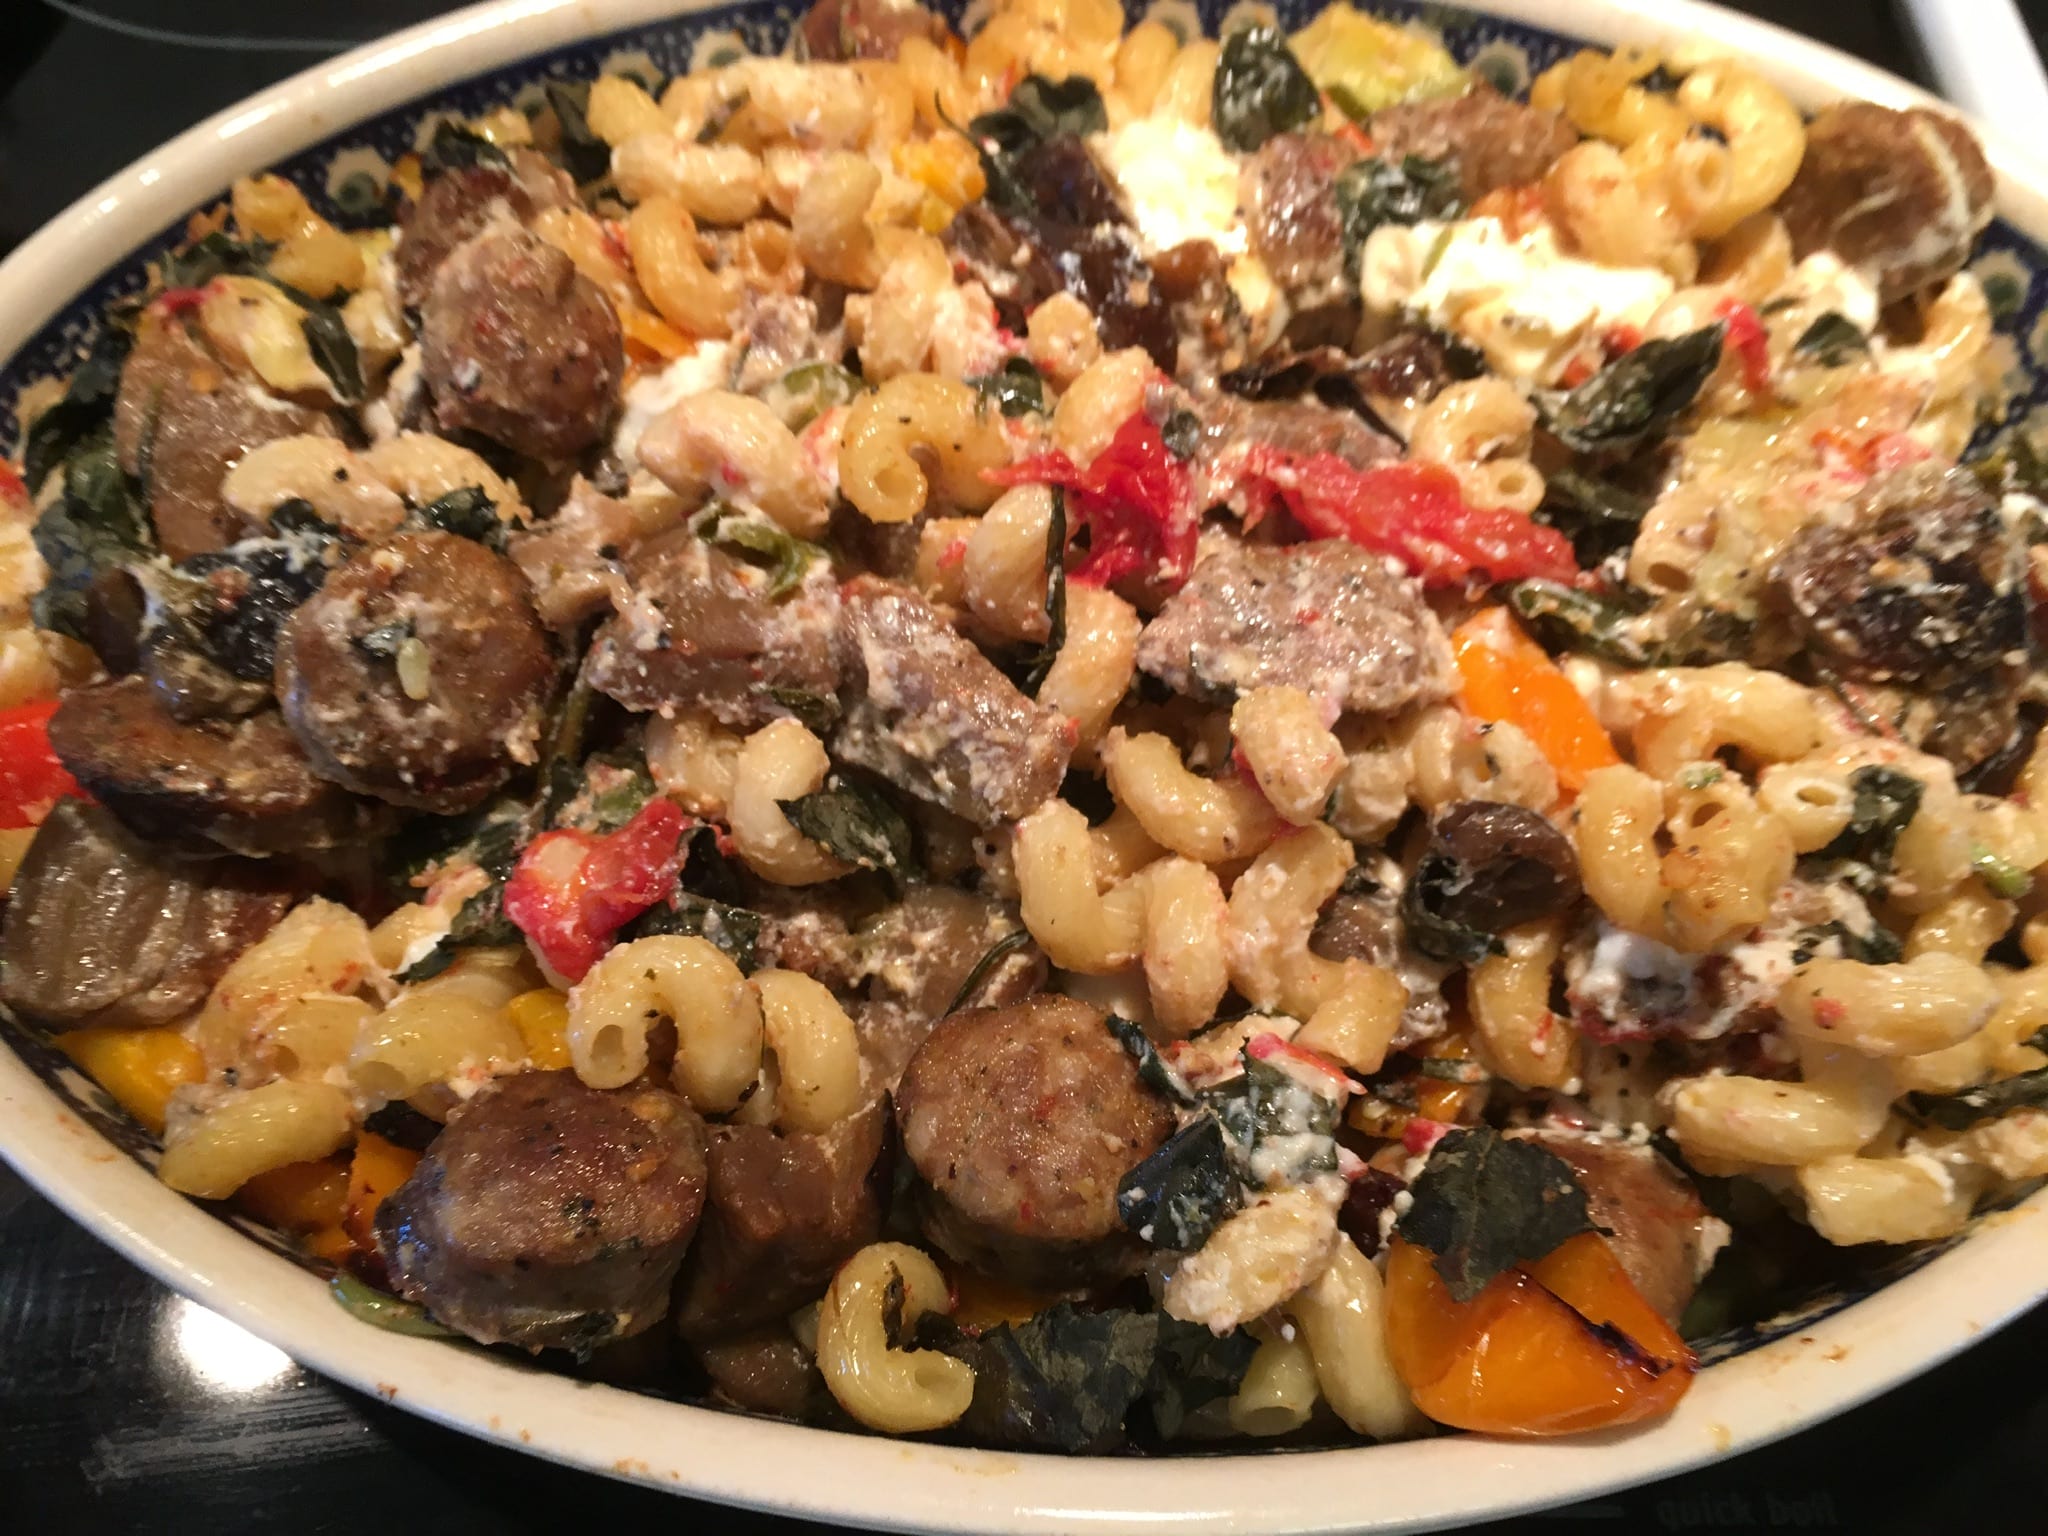 Cavatappi with Sausage Organic Vegetables and Herbs